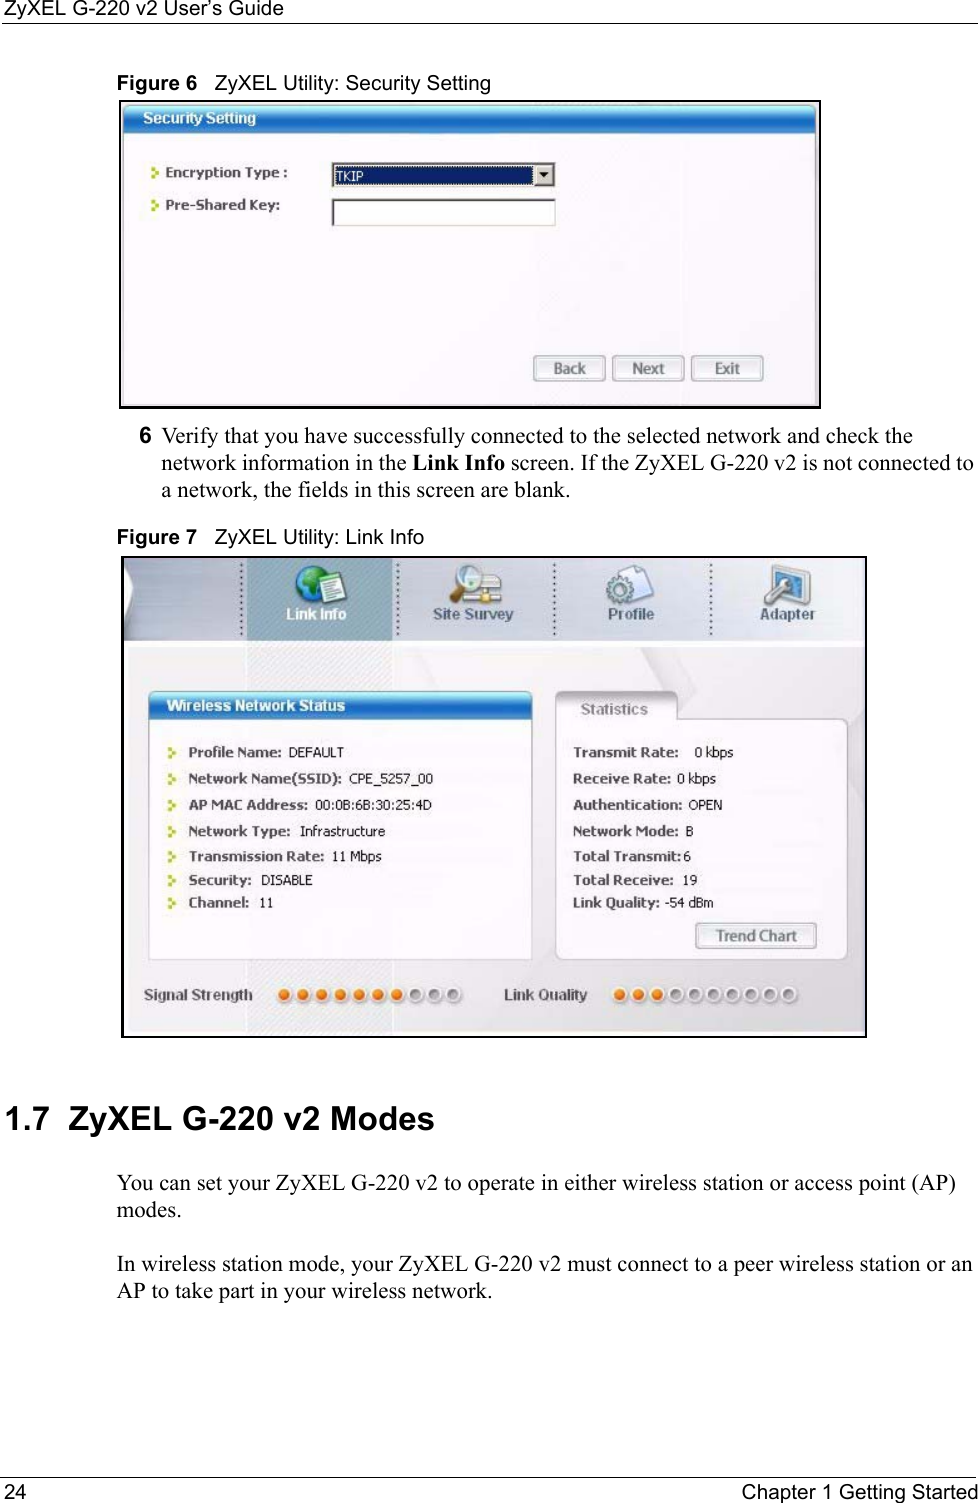 ZyXEL G-220 v2 User’s Guide24 Chapter 1 Getting StartedFigure 6   ZyXEL Utility: Security Setting 6Verify that you have successfully connected to the selected network and check the network information in the Link Info screen. If the ZyXEL G-220 v2 is not connected to a network, the fields in this screen are blank.Figure 7   ZyXEL Utility: Link Info 1.7  ZyXEL G-220 v2 Modes    You can set your ZyXEL G-220 v2 to operate in either wireless station or access point (AP) modes. In wireless station mode, your ZyXEL G-220 v2 must connect to a peer wireless station or an AP to take part in your wireless network.